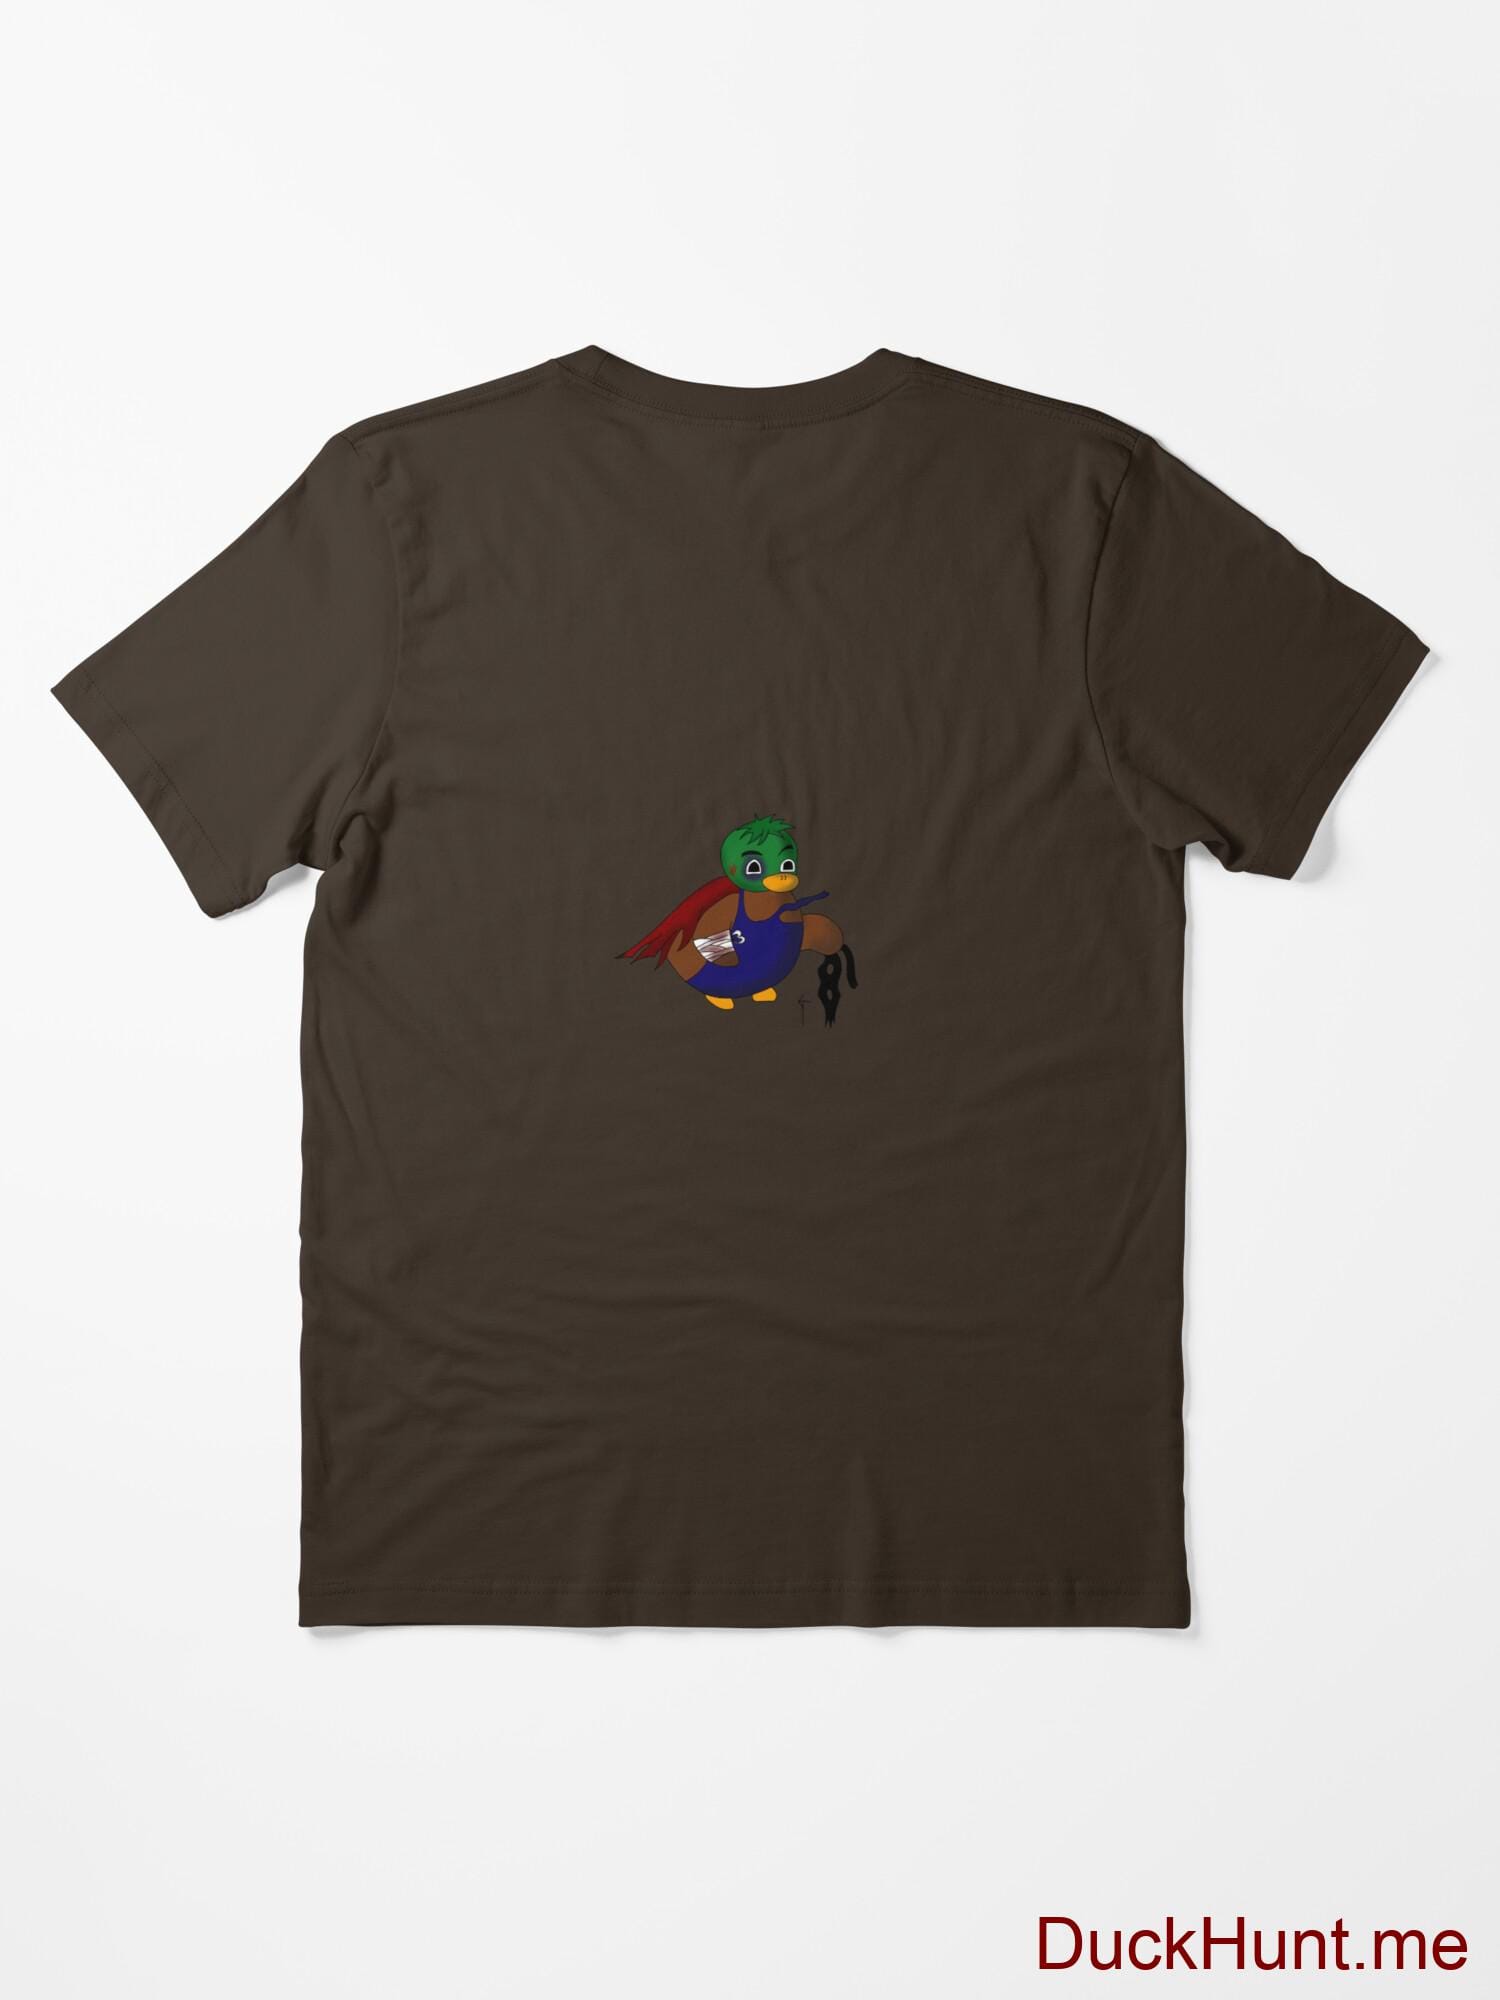 Dead DuckHunt Boss (smokeless) Brown Essential T-Shirt (Back printed) alternative image 1